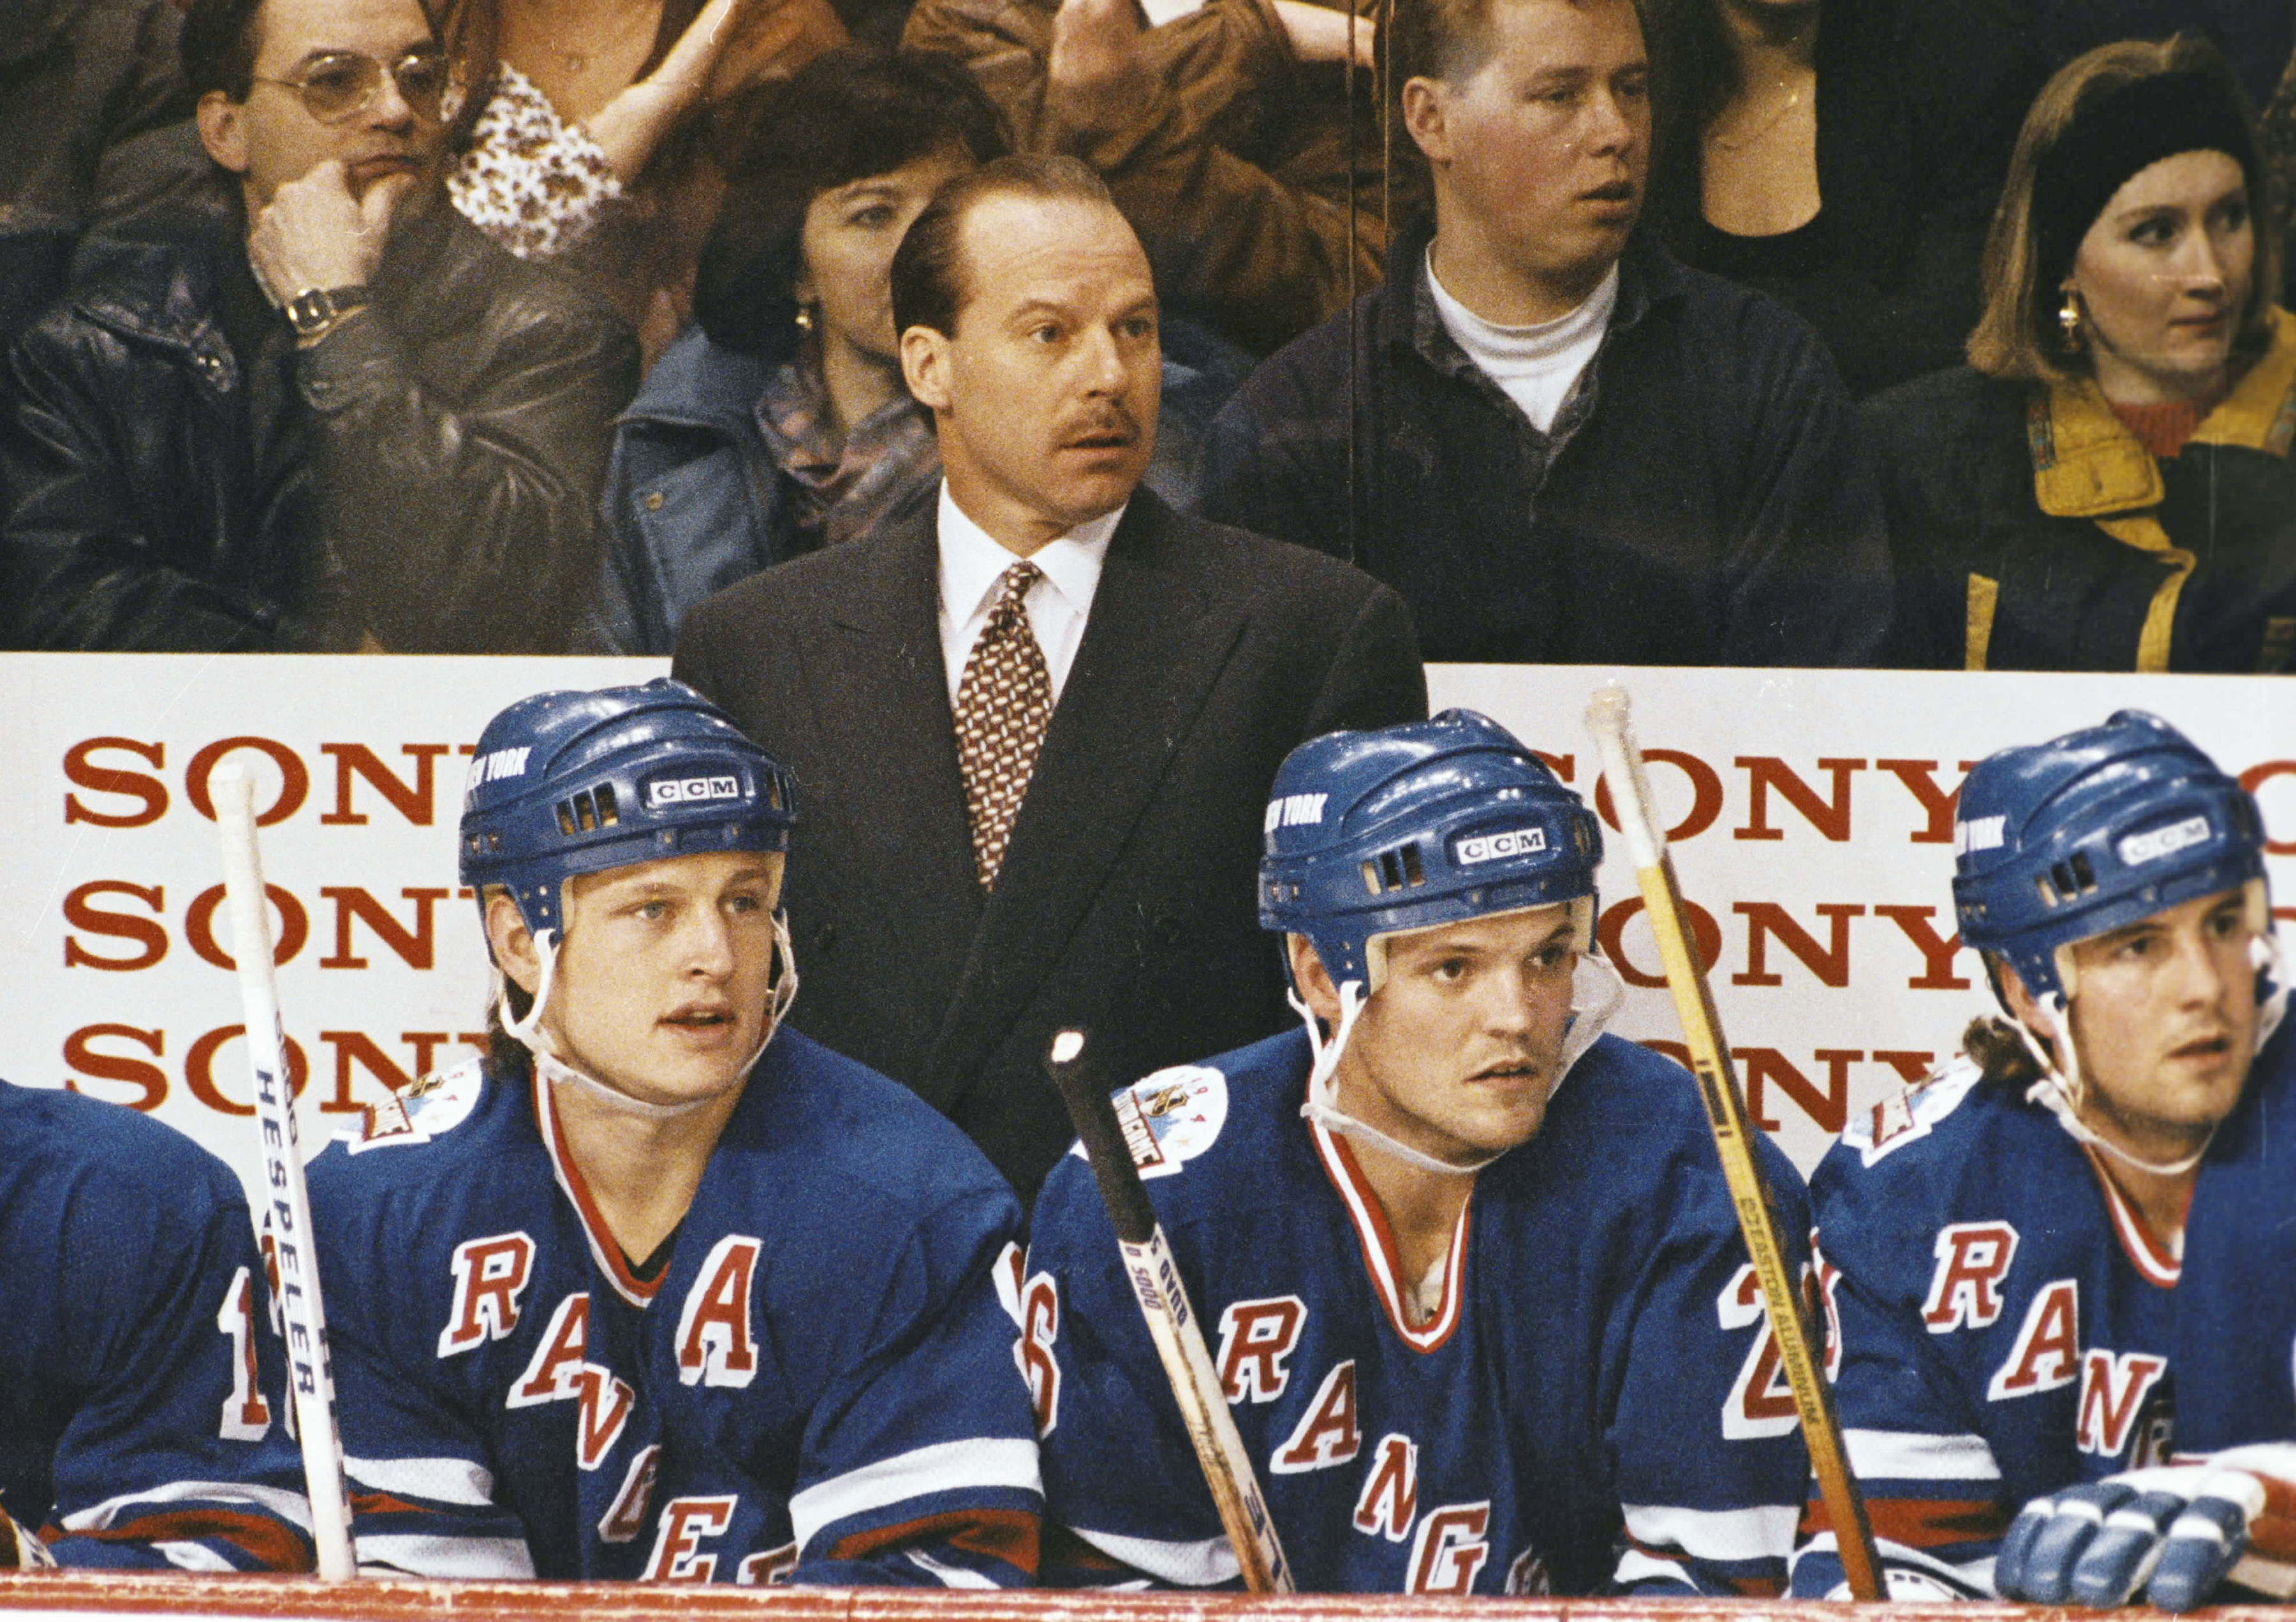 MONTREAL, CANADA - CIRCA 1993: Head Coach of the New York Rangers Mike Keenan follows the action from the bench at the Montreal Forum circa 1993 in Montreal, Quebec, Canada. (Photo by Denis Brodeur/NHLI via Getty Images)